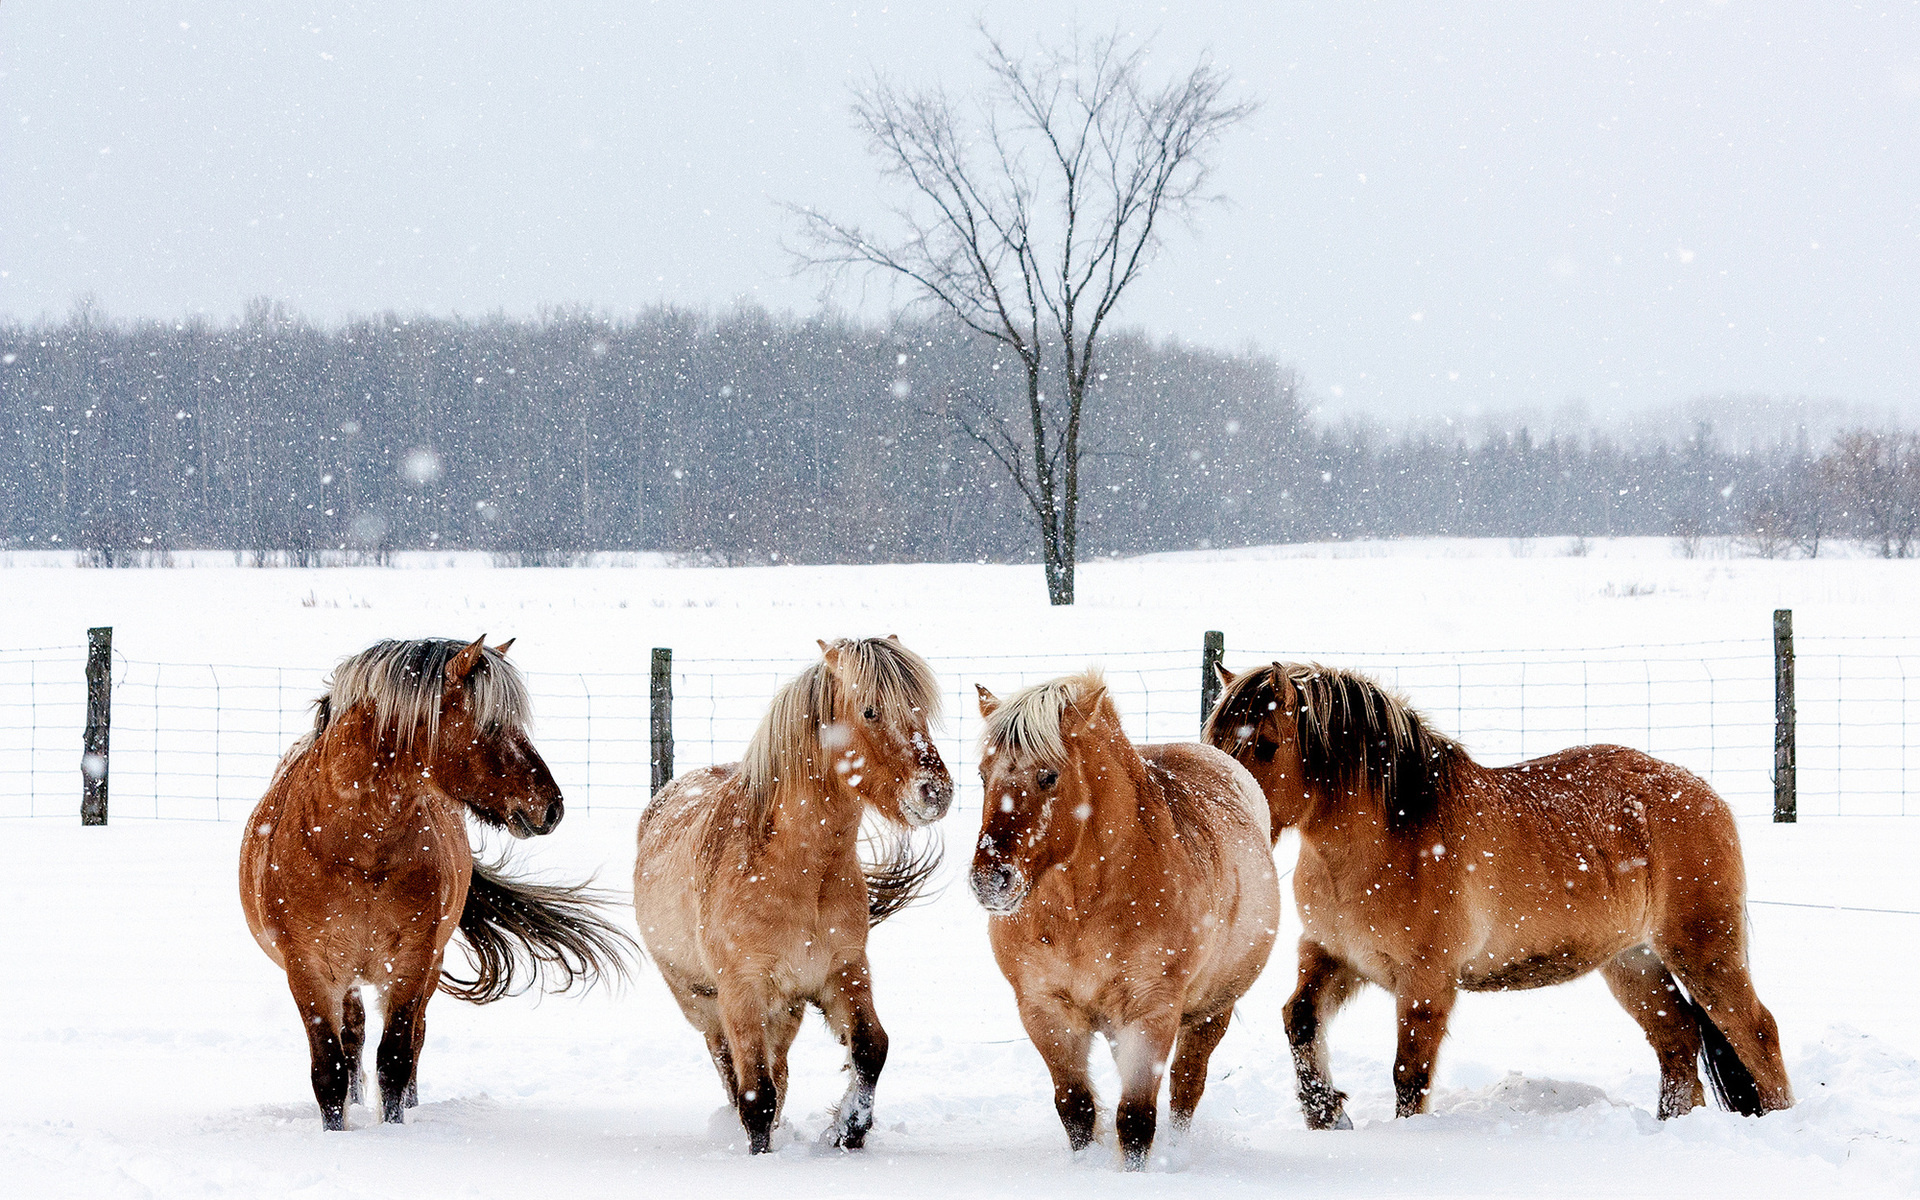 Horses in the snow, Stunning wallpapers, Snowy landscapes, Winter scenes, 1920x1200 HD Desktop